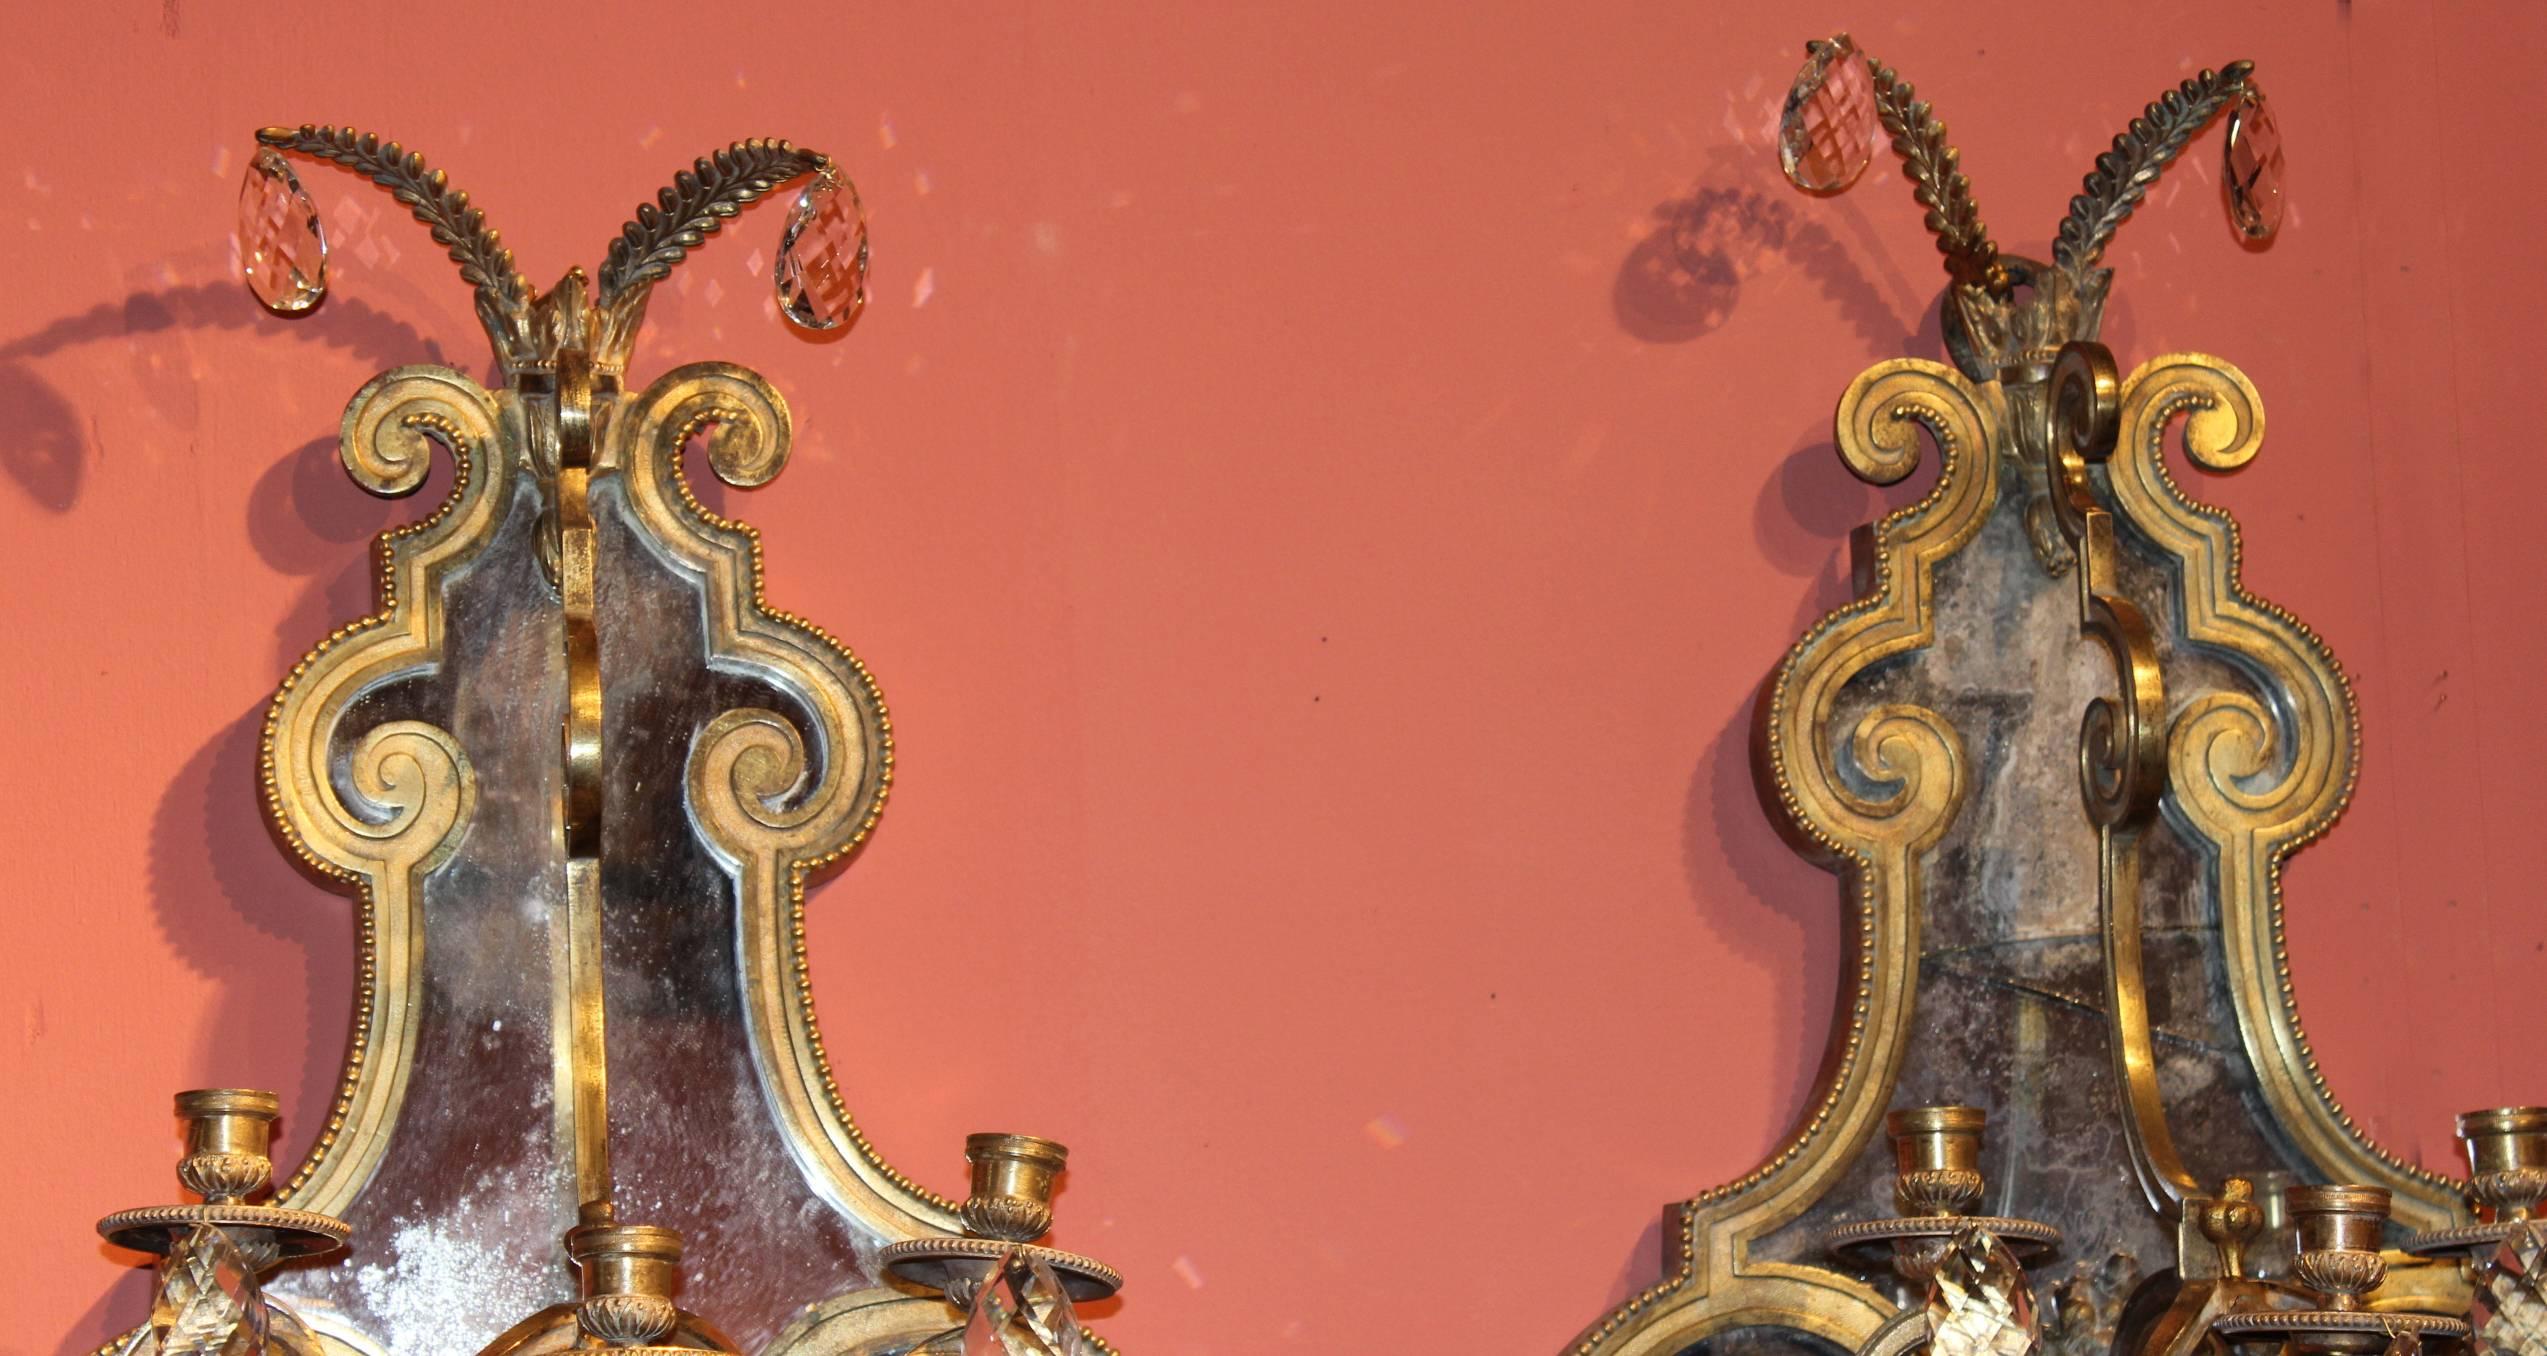 A beautiful pair of gilt bronze mirrored six candle sconces with crystals, probably European in origin. Great form in very good overall condition, with some breaks, losses, and expected wear. Probably from Italy in the late 19th century.